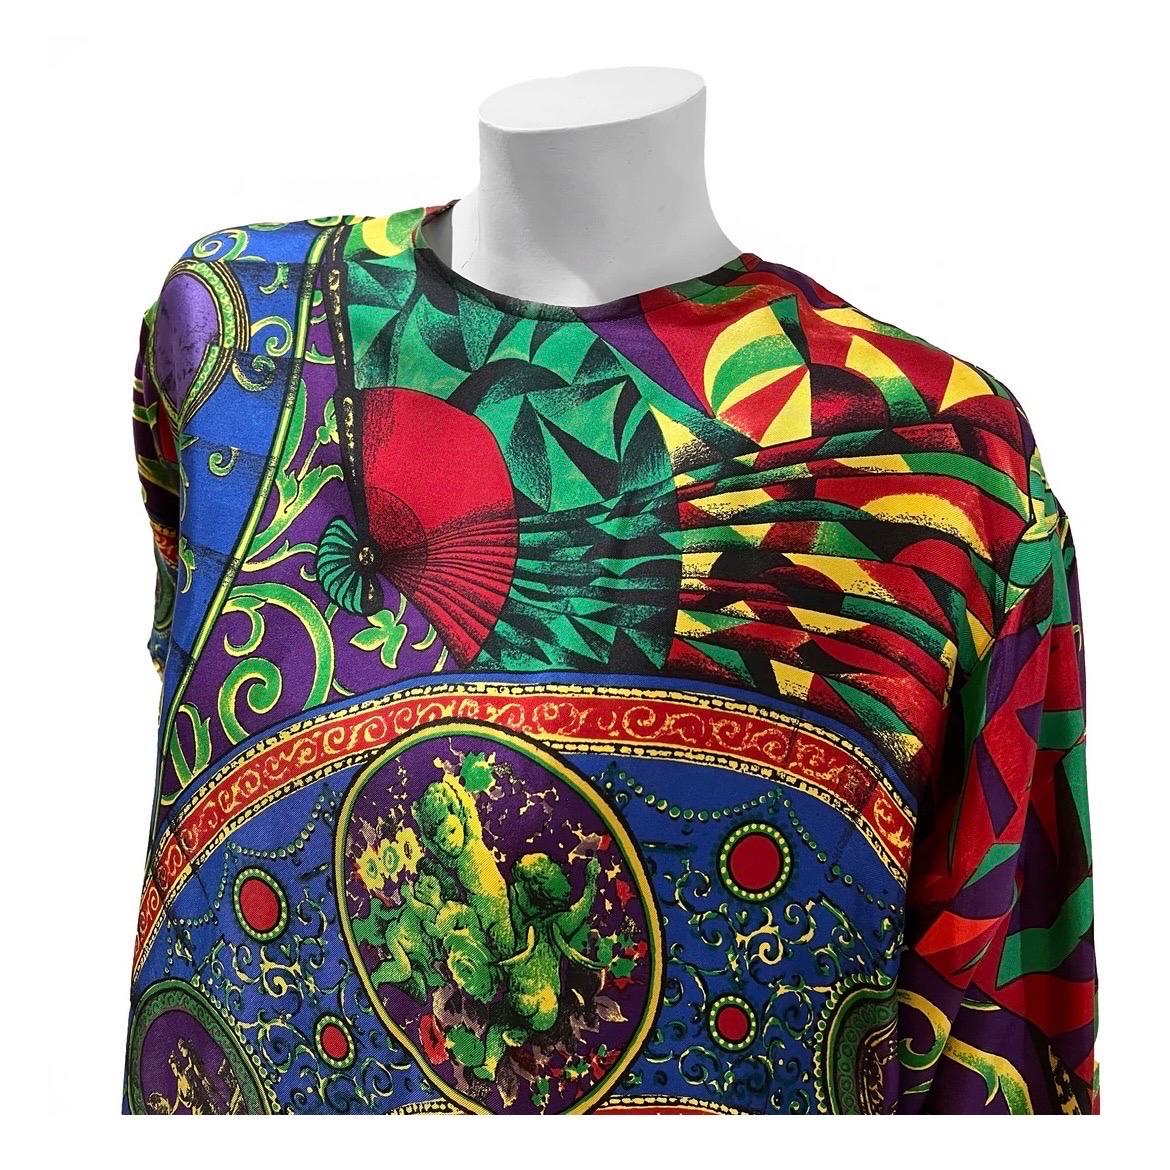 Vintage fan print silk blouse by Gianni Versace
Circa 1990's 
Made in Italy
Multicolored fan print with cherub illustrations and baroque print
Double button at back collar
Single button closure on each wrist cuff
100% silk
Condition: